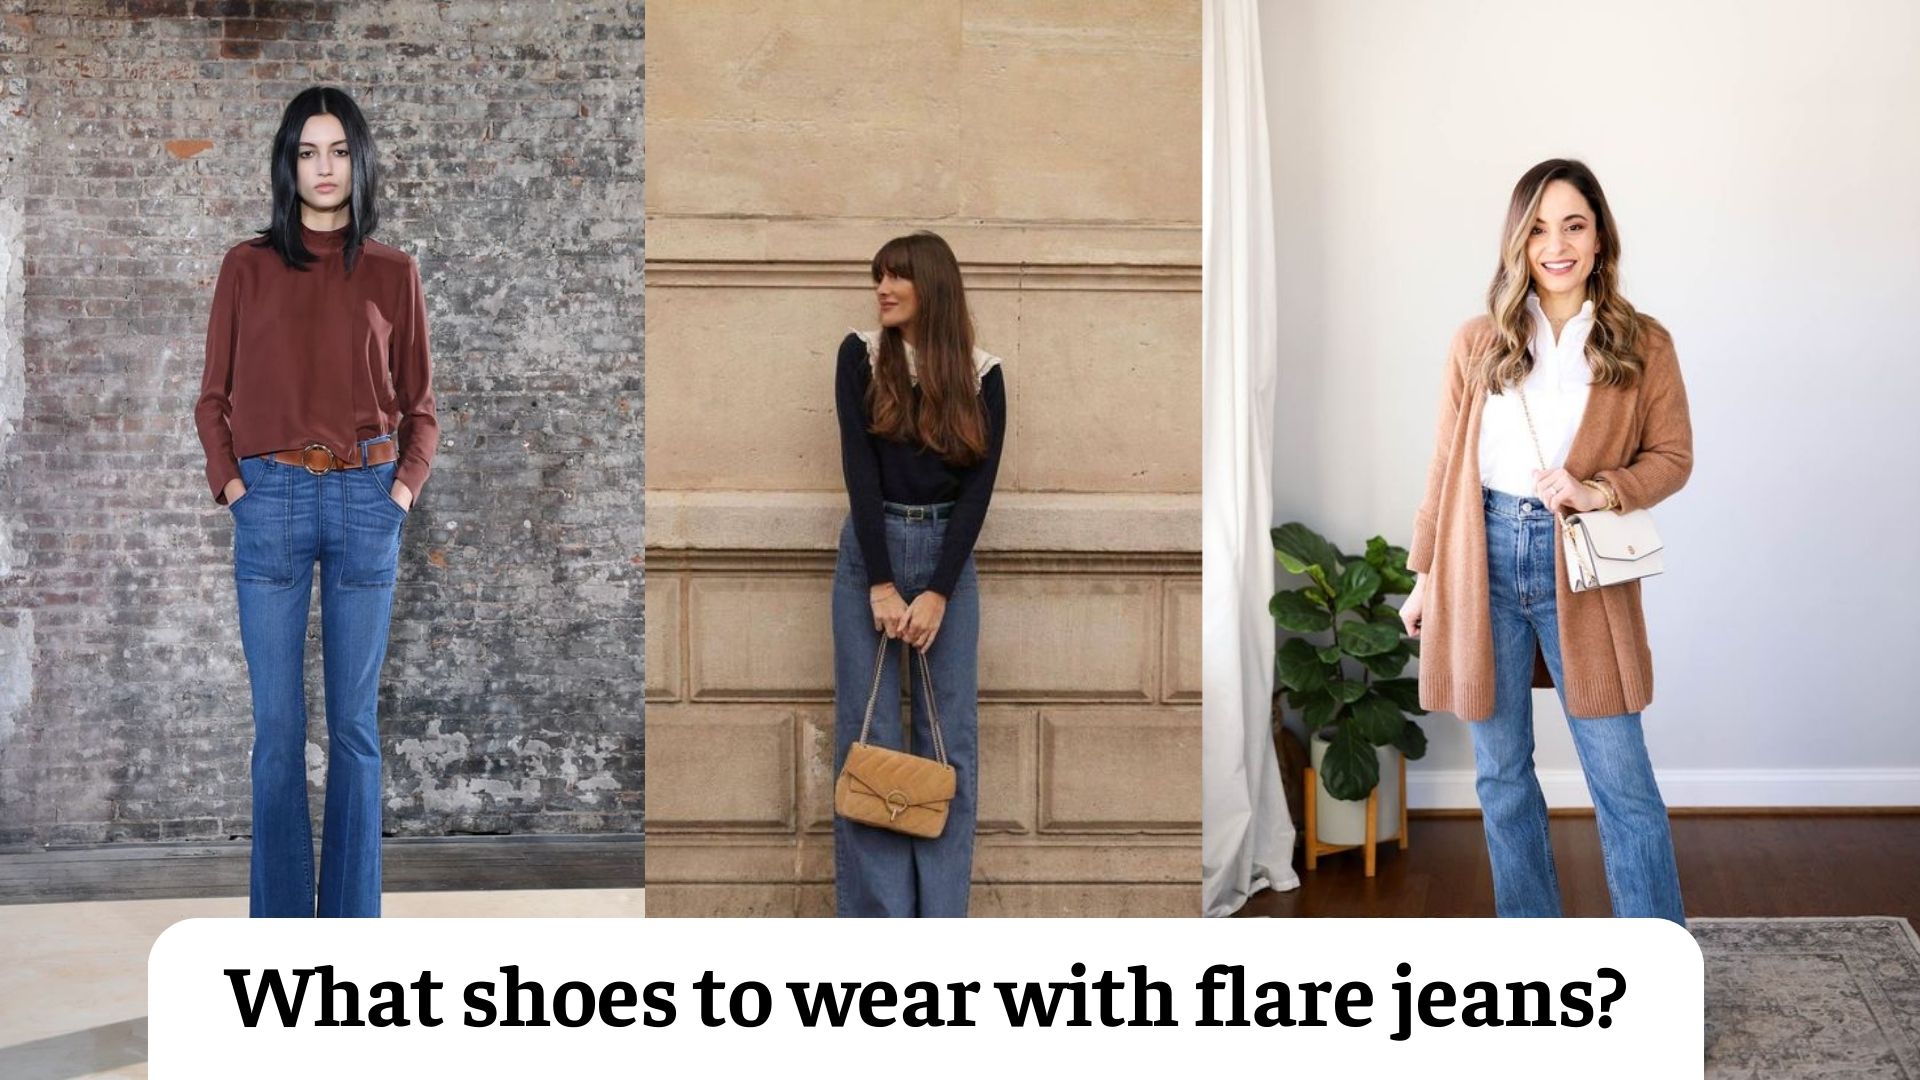 What shoes to wear with flare jeans?